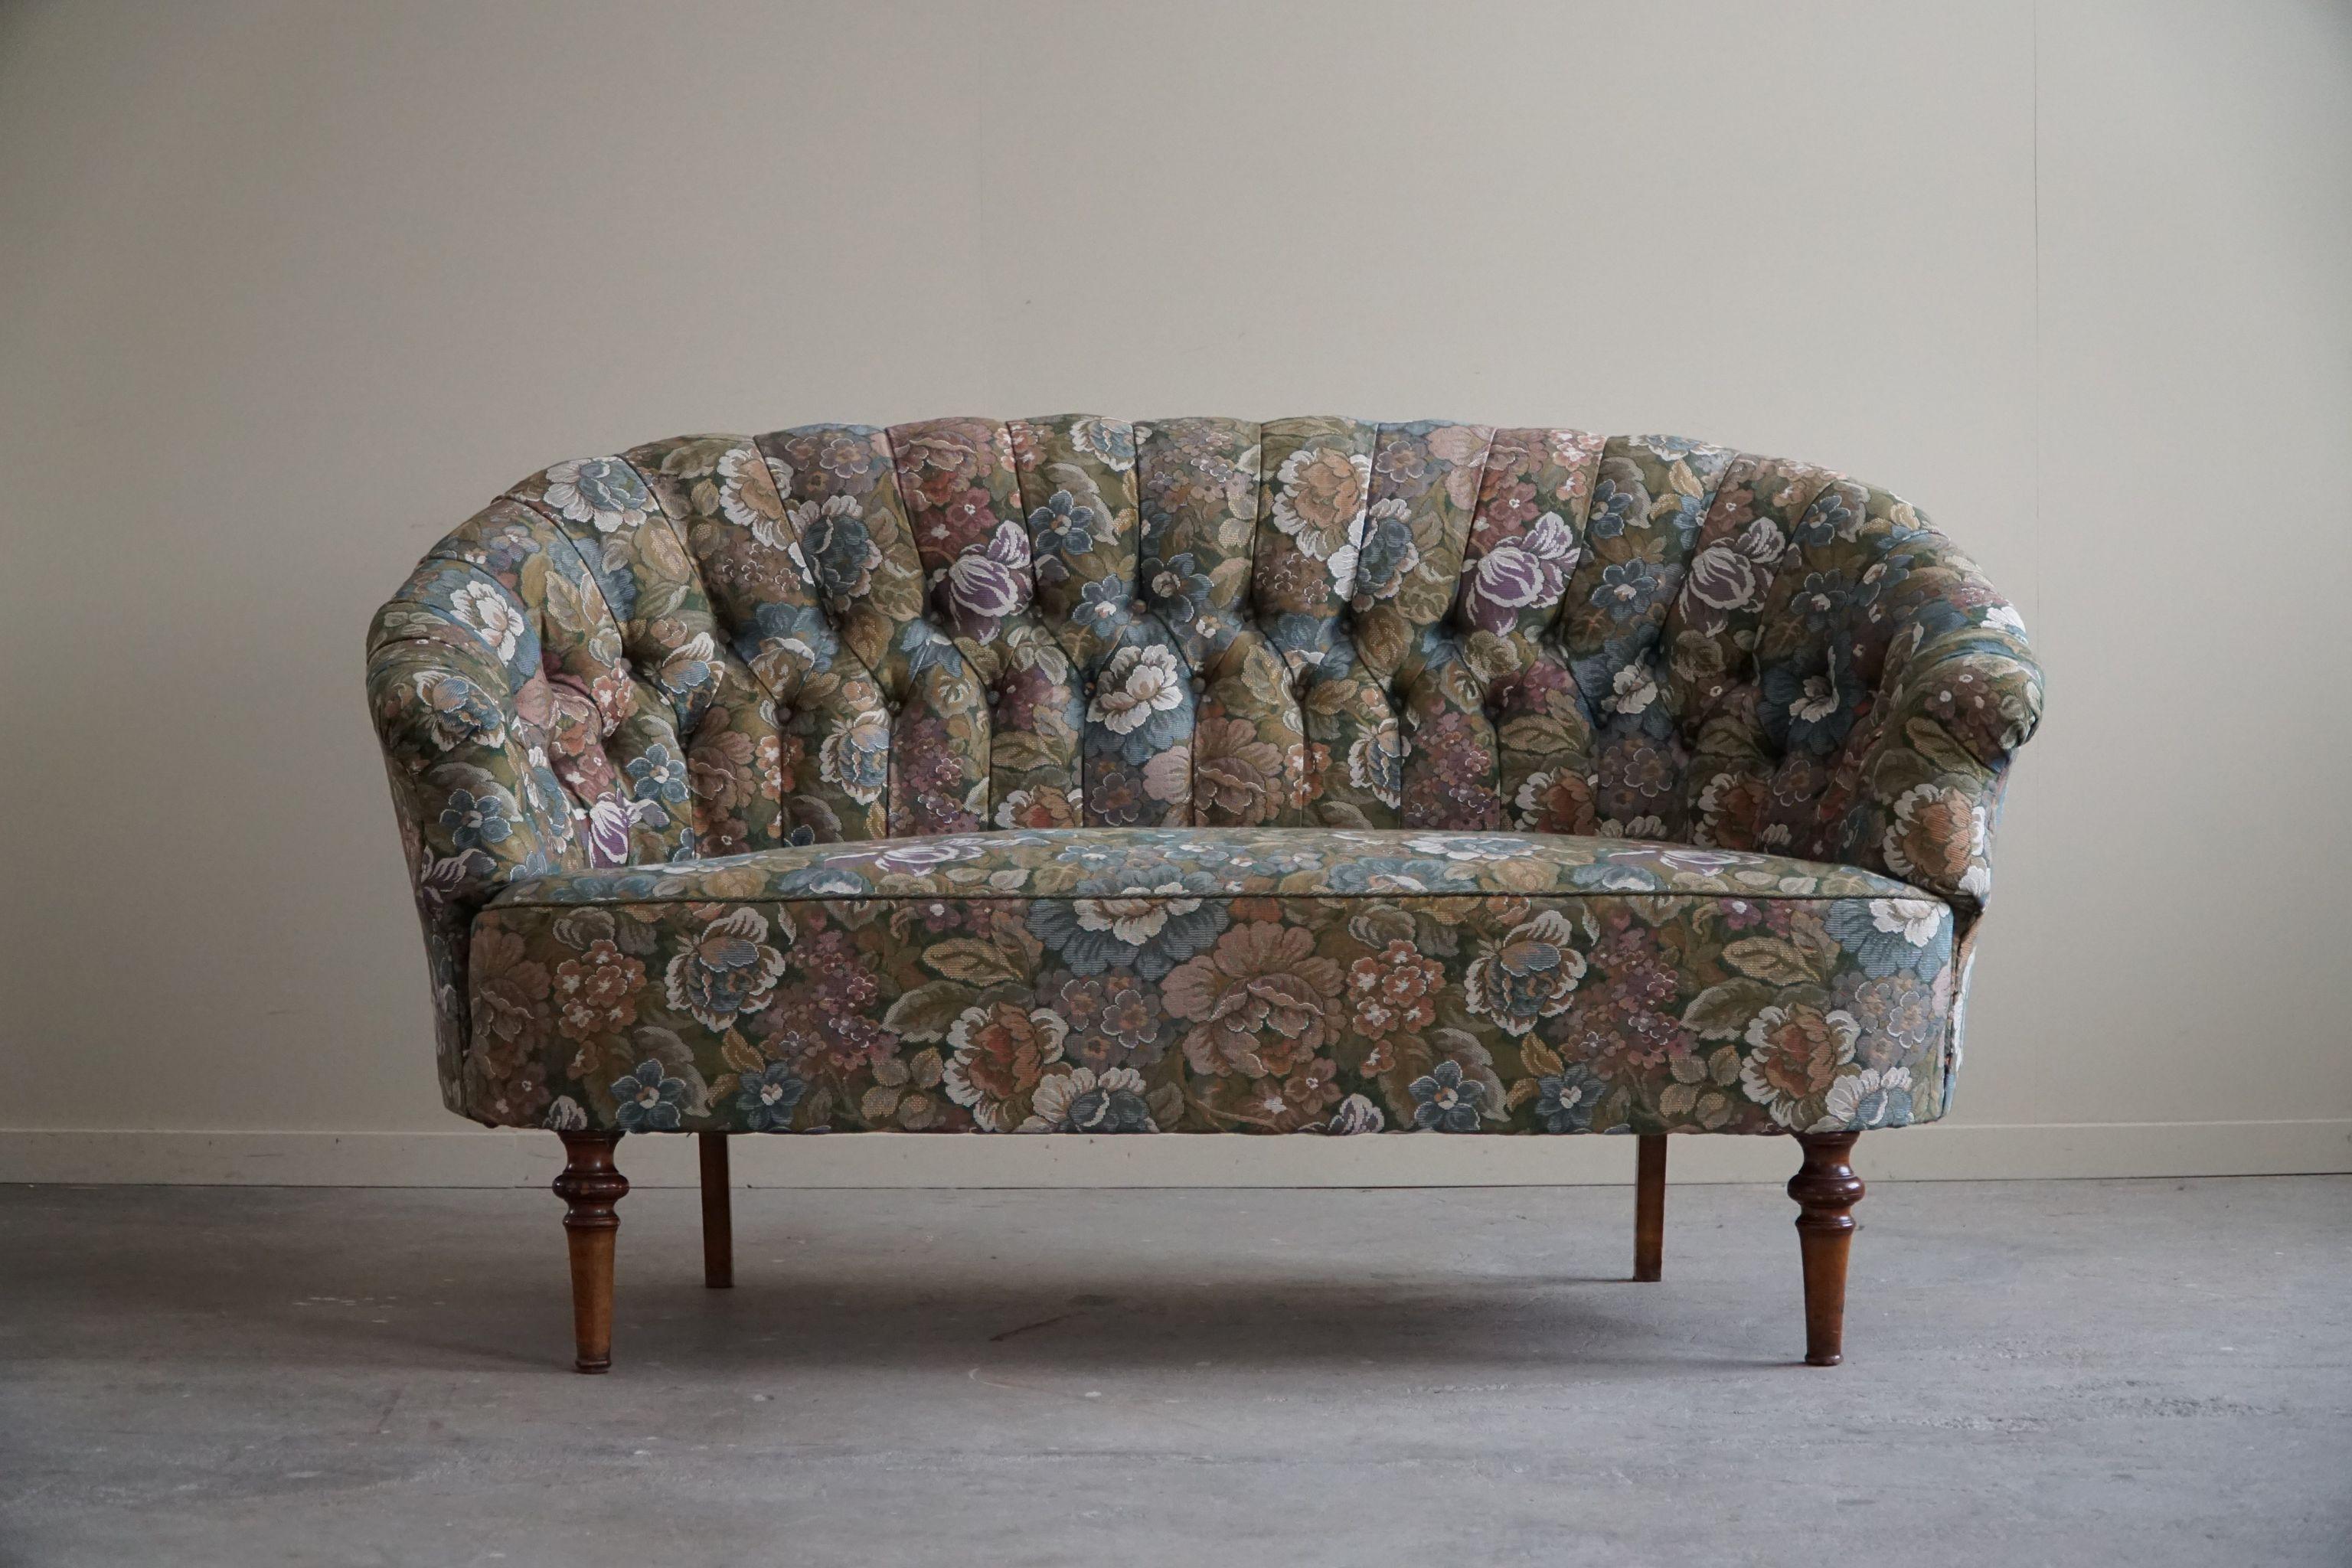 Baroque Antique Curved Sofa with Flora Fabric, By a Danish Cabinetmaker, Early 1900s